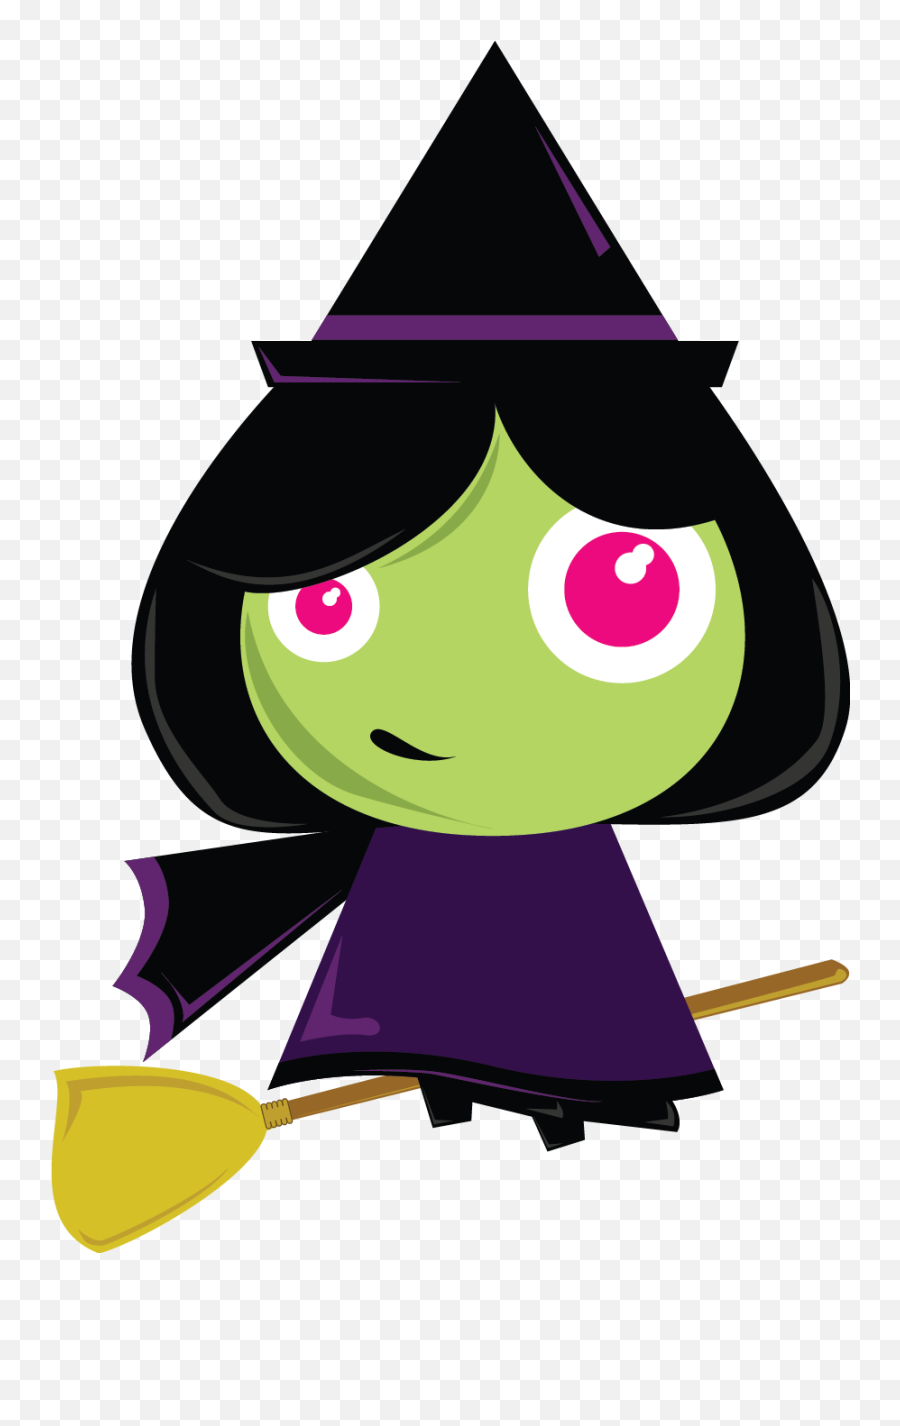 Witch Free To Use Cliparts - Clipartix Witches Clip Art Emoji,Emoji Witch